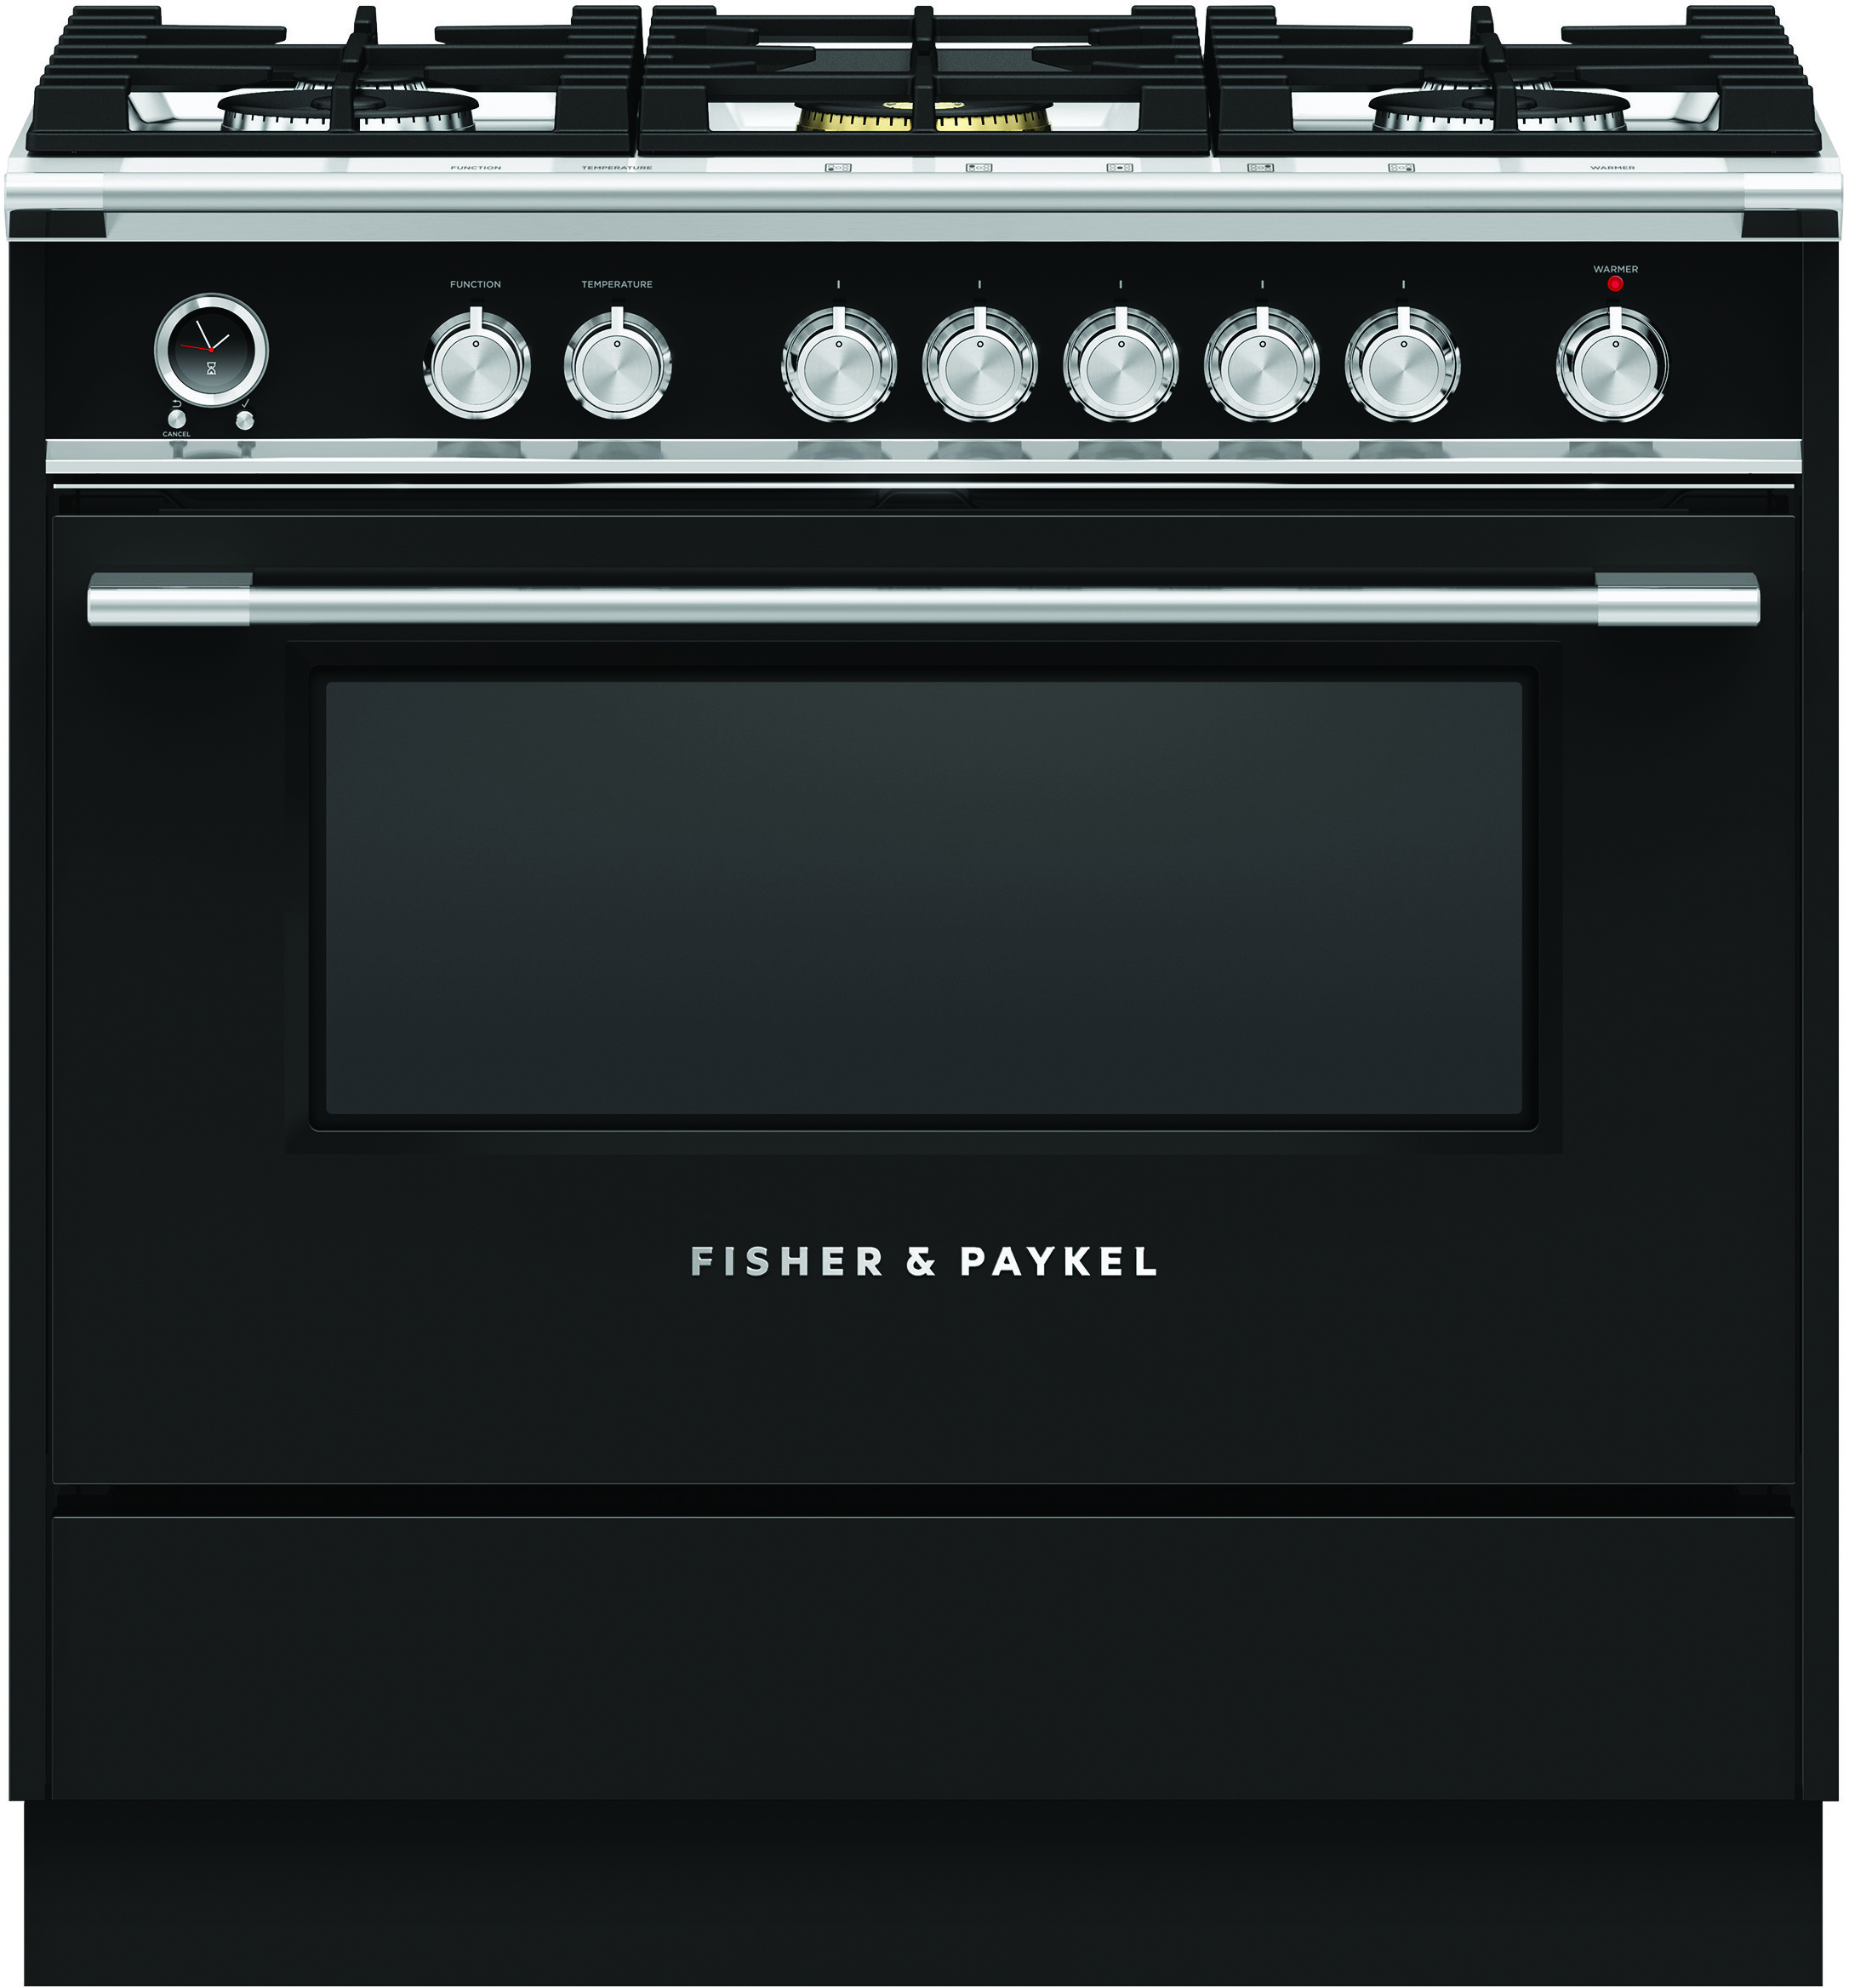 Fisher & Paykel Series 9 classic 36 Freestanding Dual Fuel Natural Gas Range OR36SCG6B1